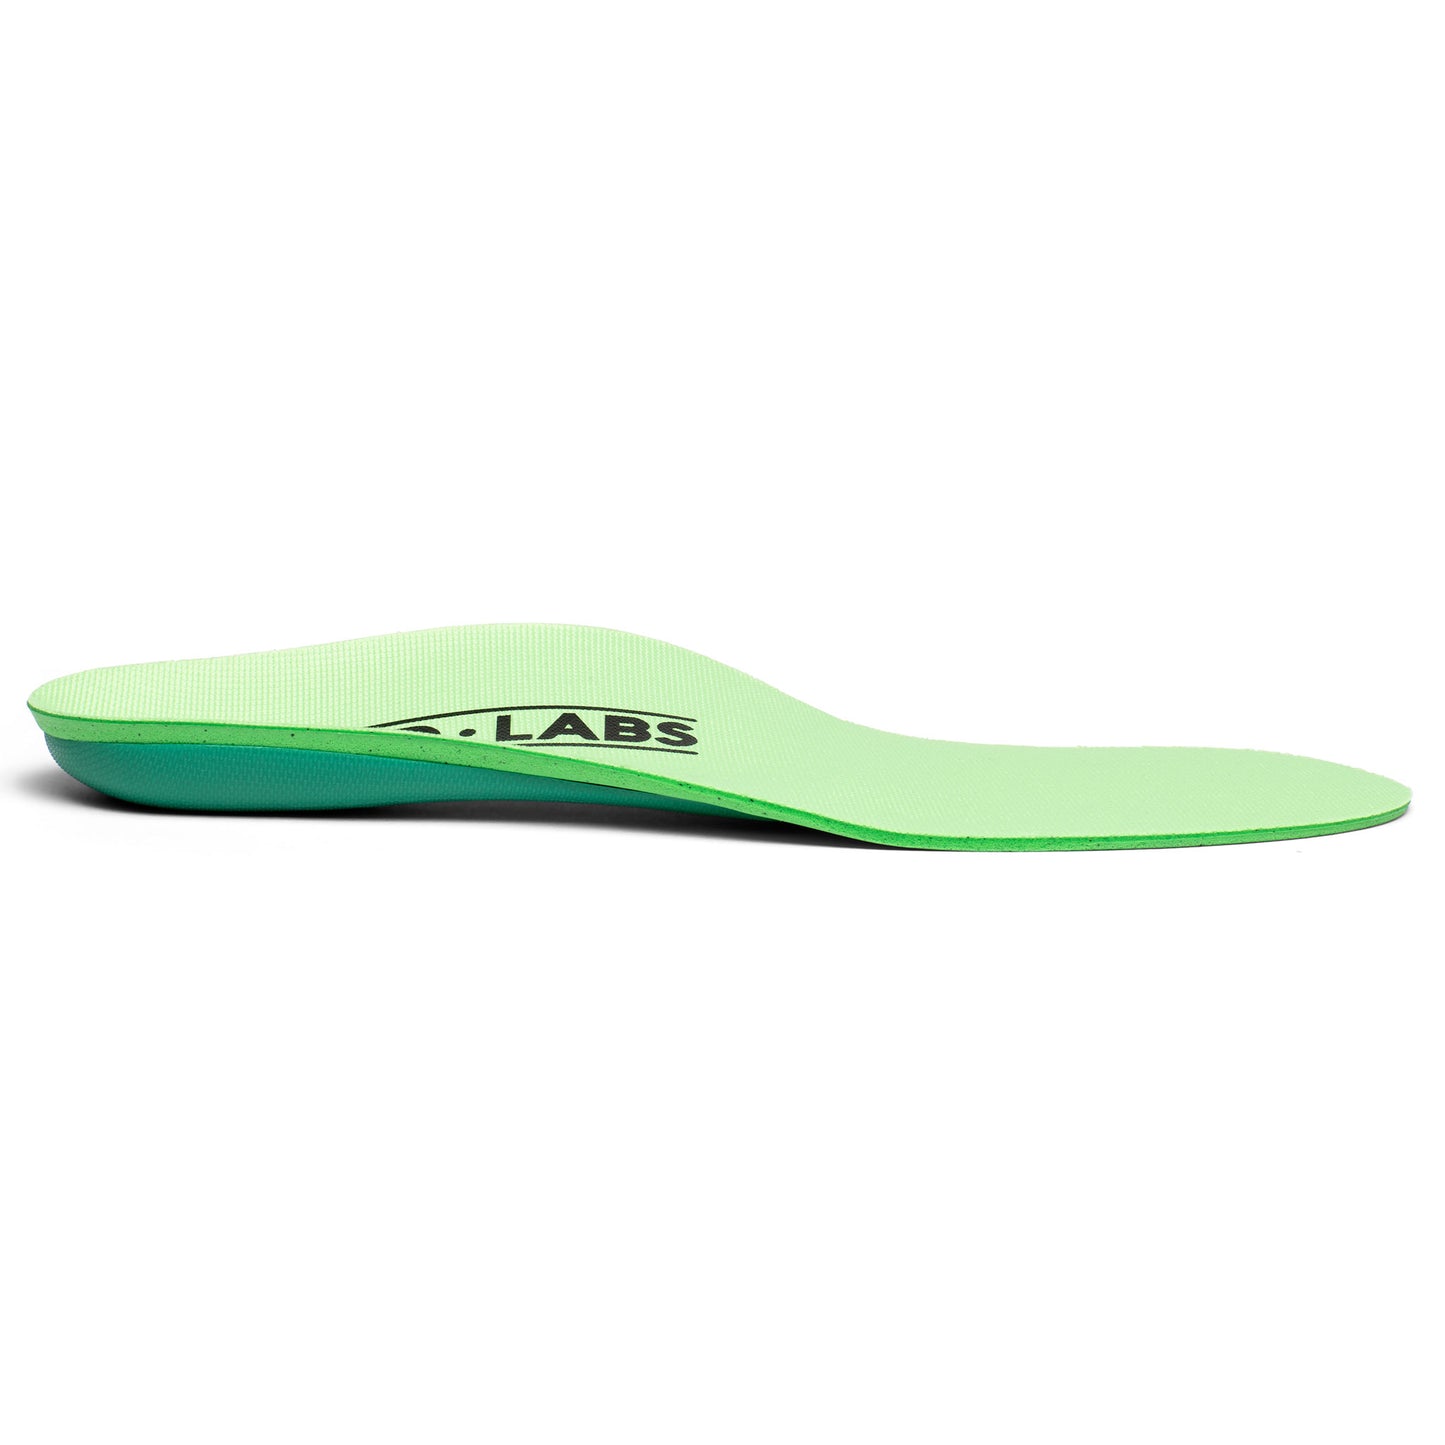 Ramble Comfort Insoles For High Arch Support